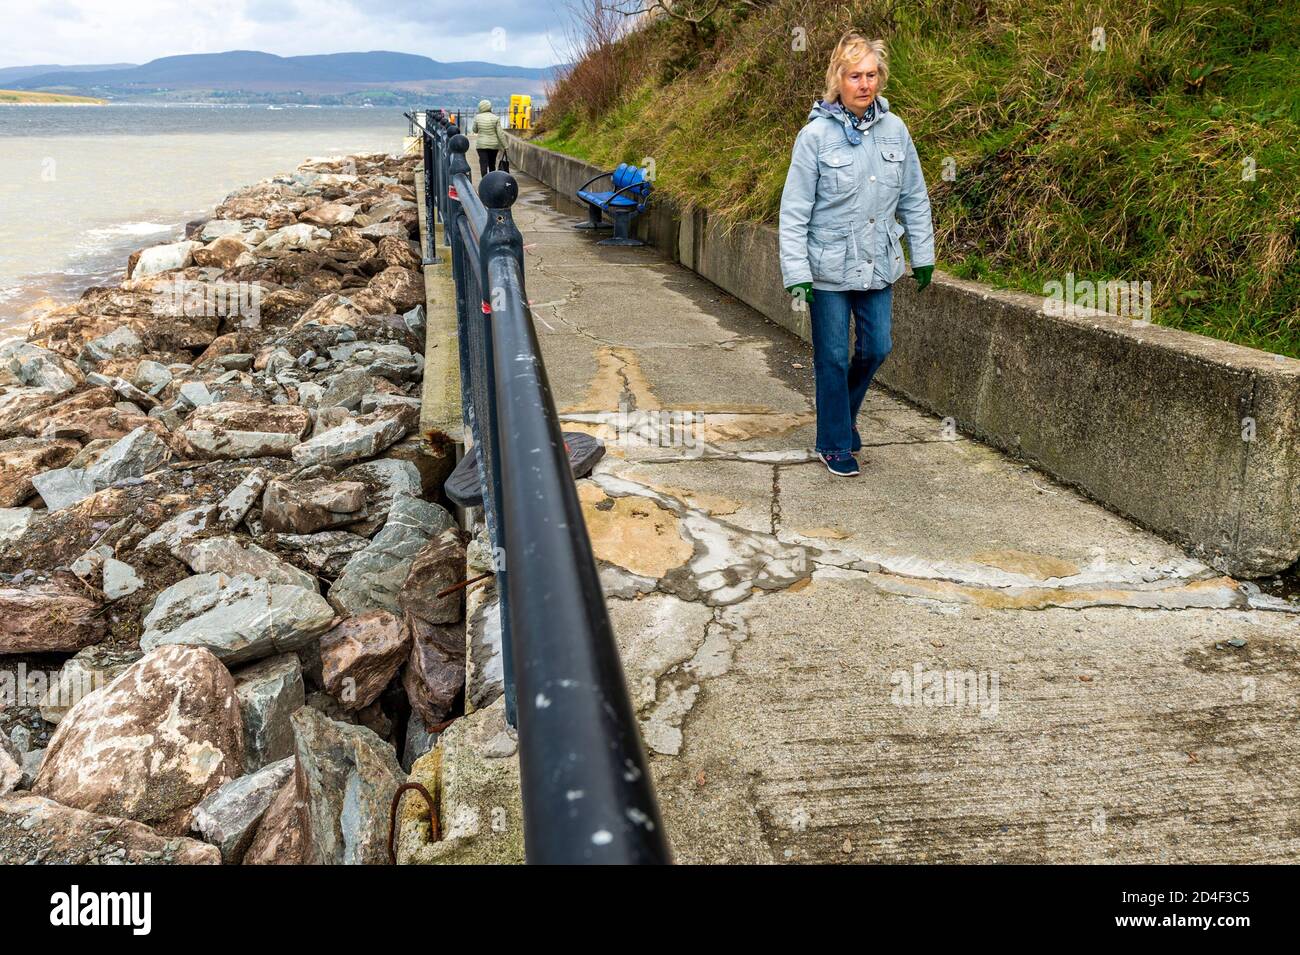 Bantry, West Cork, Ireland. 9th Oct, 2020. Cork County Council has signed off on repairs to the sea wall on the Beicin Walkway in Bantry after parts of the wall started to crumble away in the recent bad weather. Tracked diggers are placing heavy rocks on the beach in an attempt to prevent further corrosion to the popular walkway. Credit: AG News/Alamy Live News Stock Photo